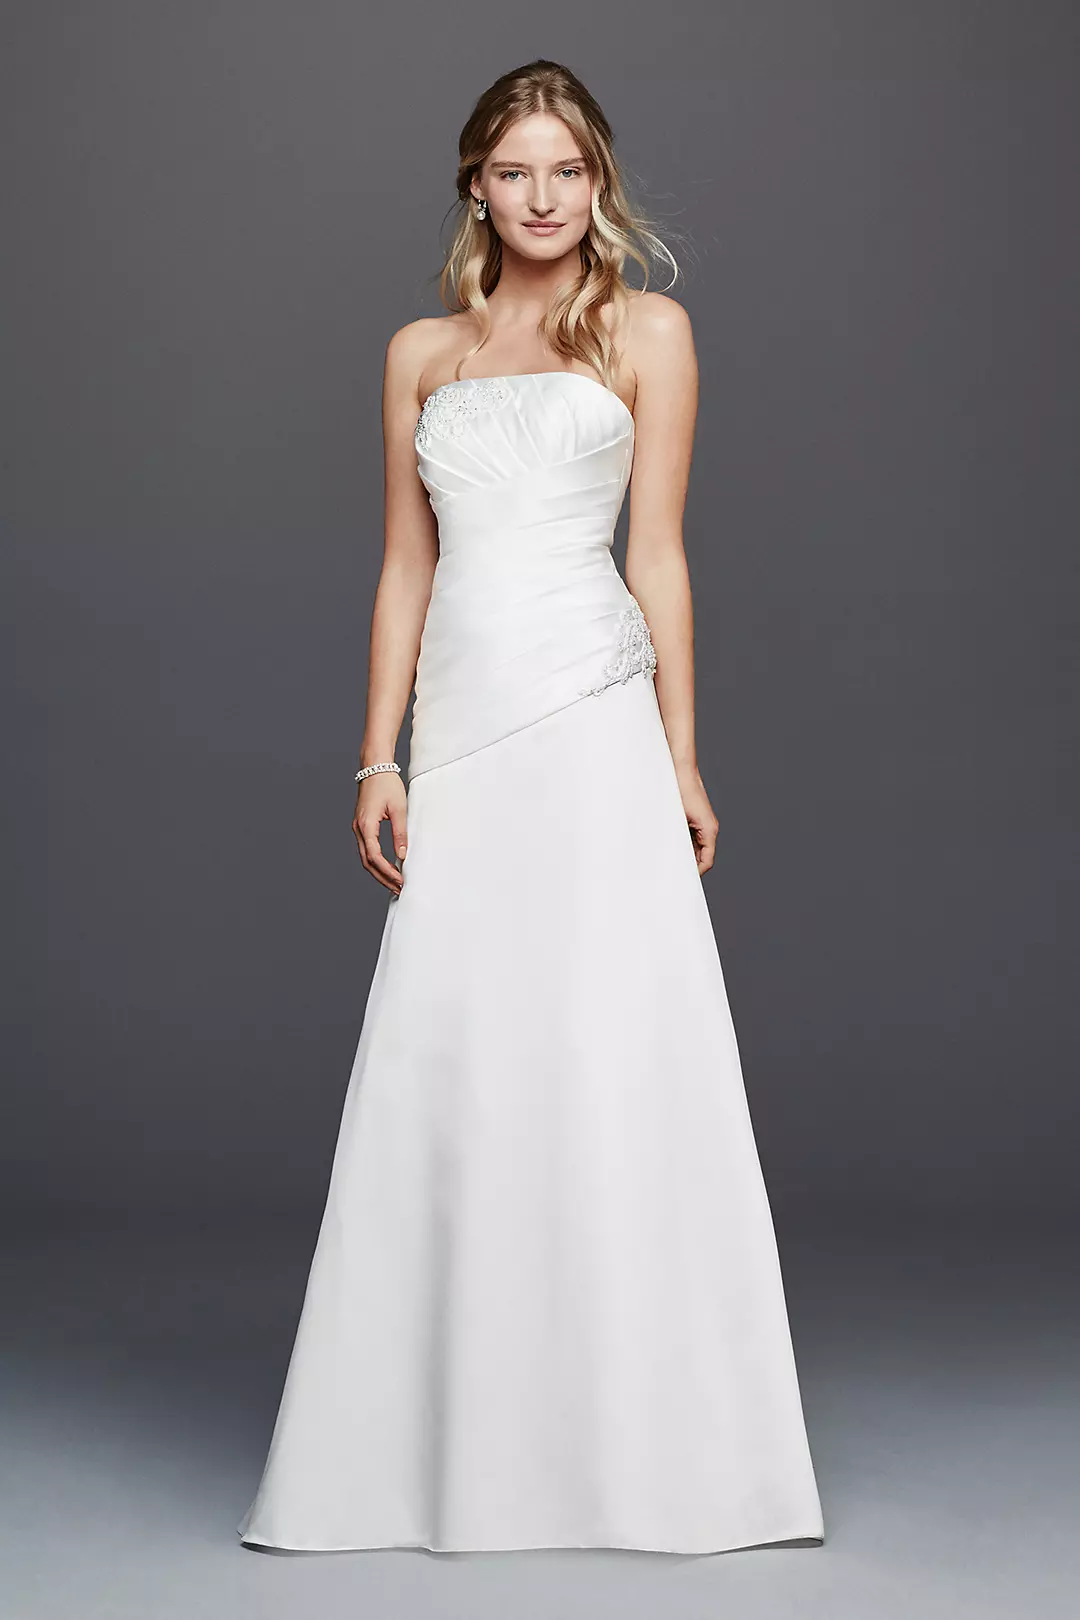 Strapless Ruched Wedding Dress with Lace Image